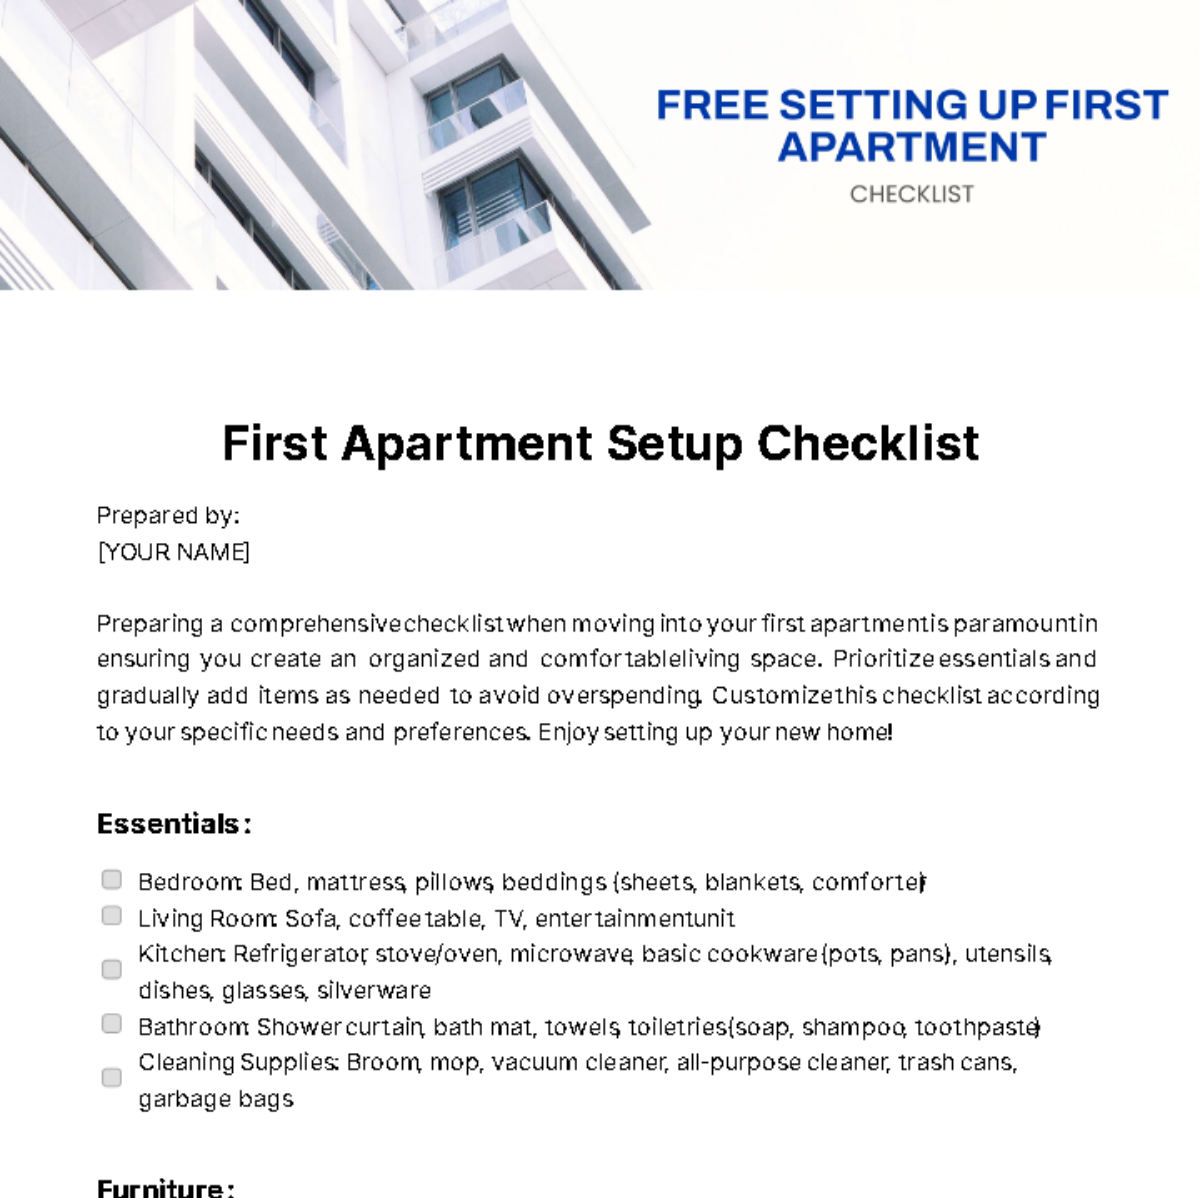 Free Setting Up First Apartment Checklist Template